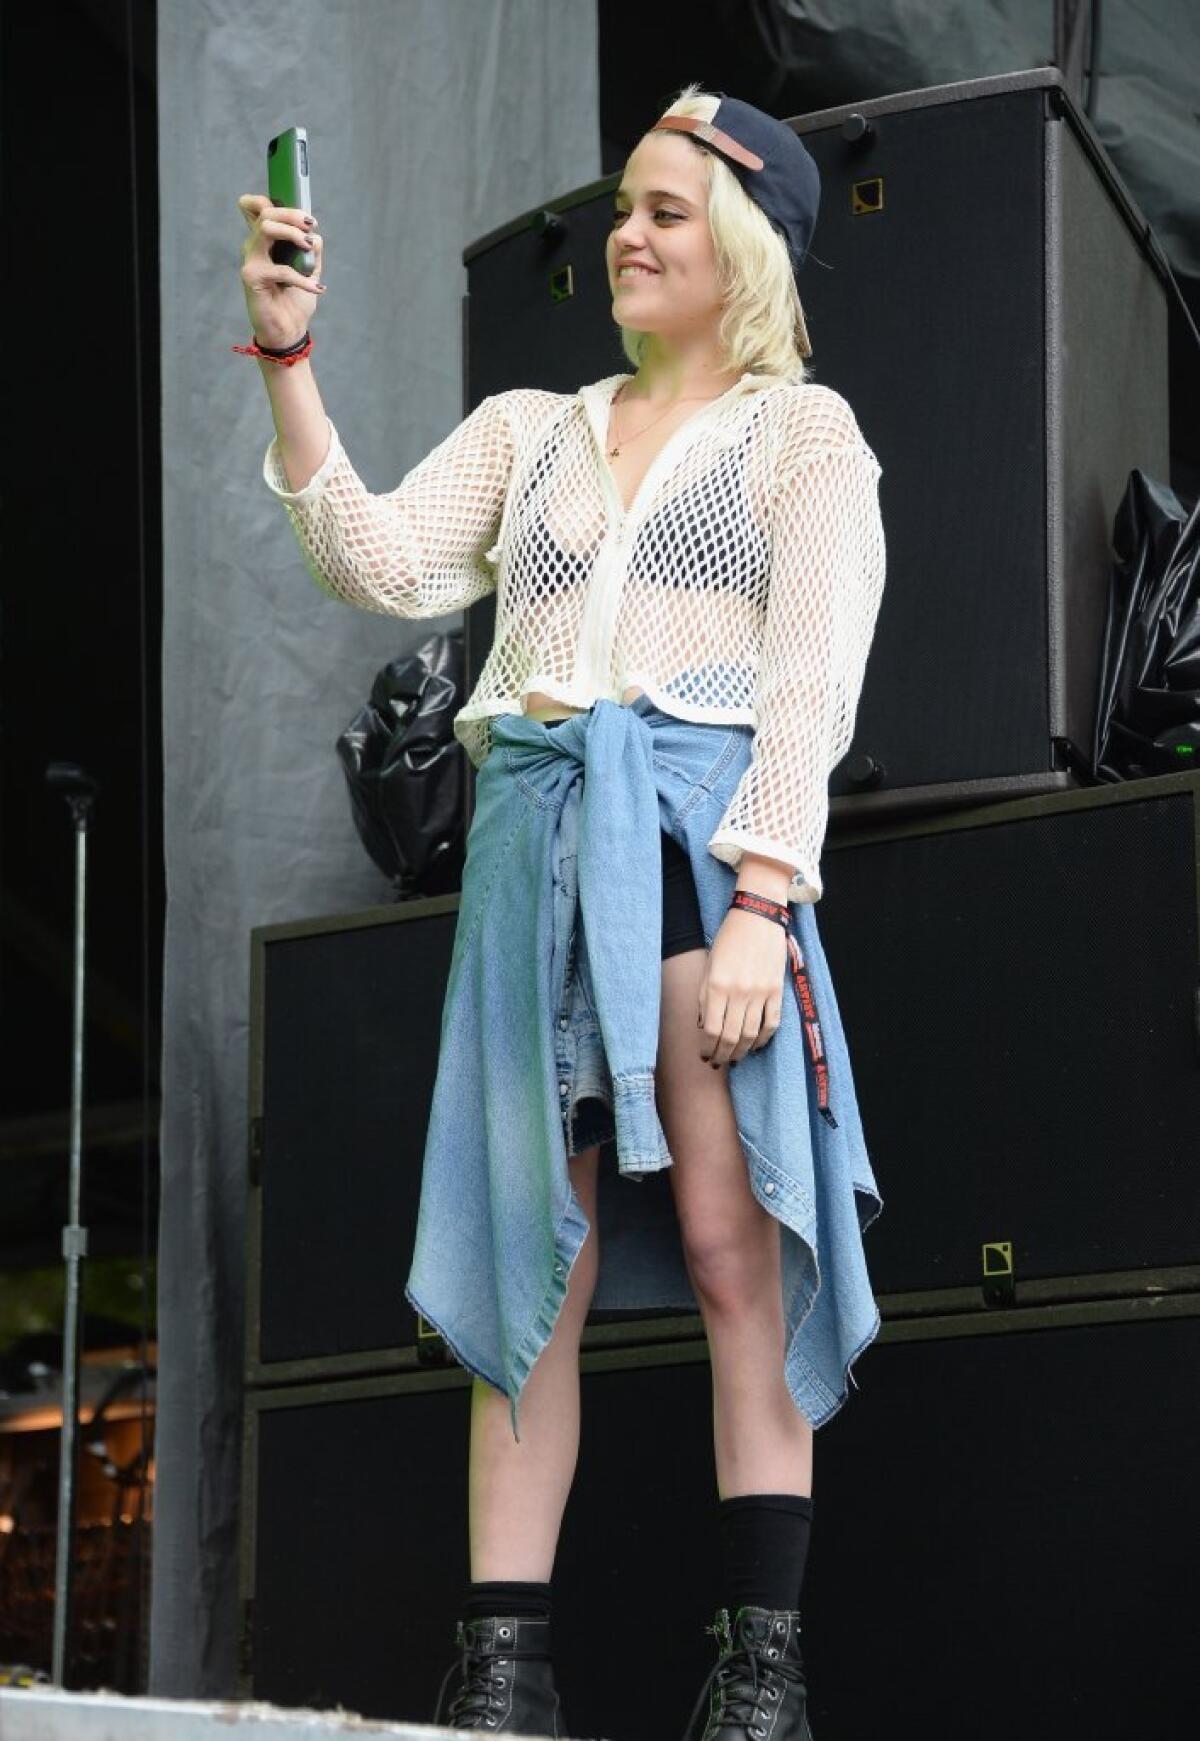 Grunge style star Sky Ferreira takes in DIIV's performance at Lollapalooza 2013 at Grant Park in Chicago.